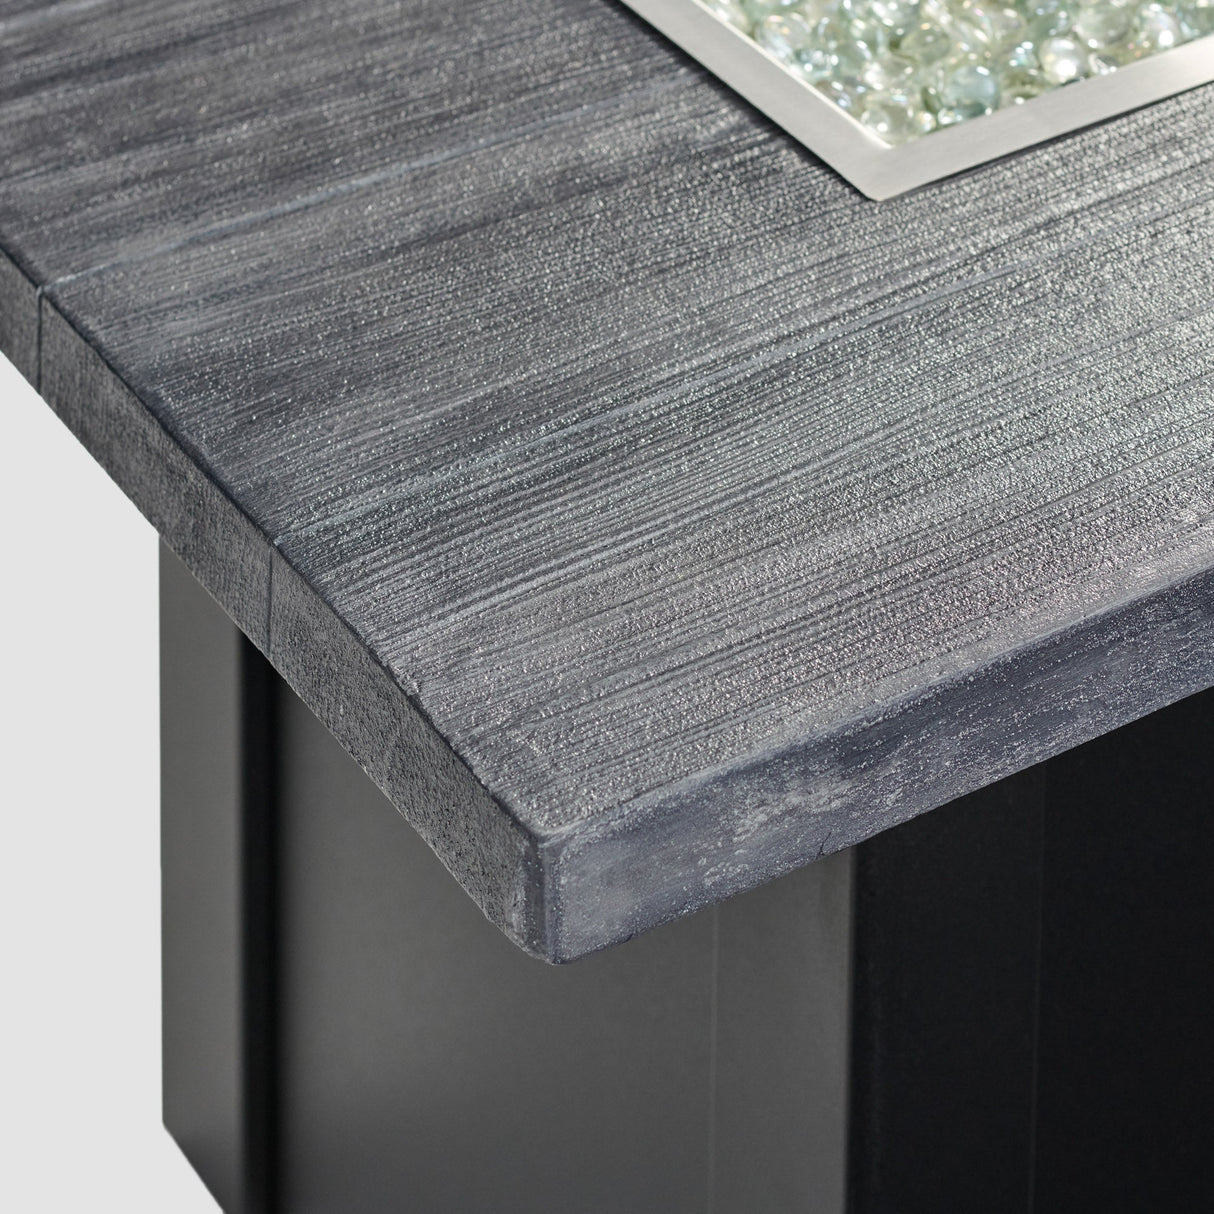 A close up view of the detail found on the top of a Havenwood Linear Gas Fire Pit Table with a Carbon Grey top and Luverne Black base